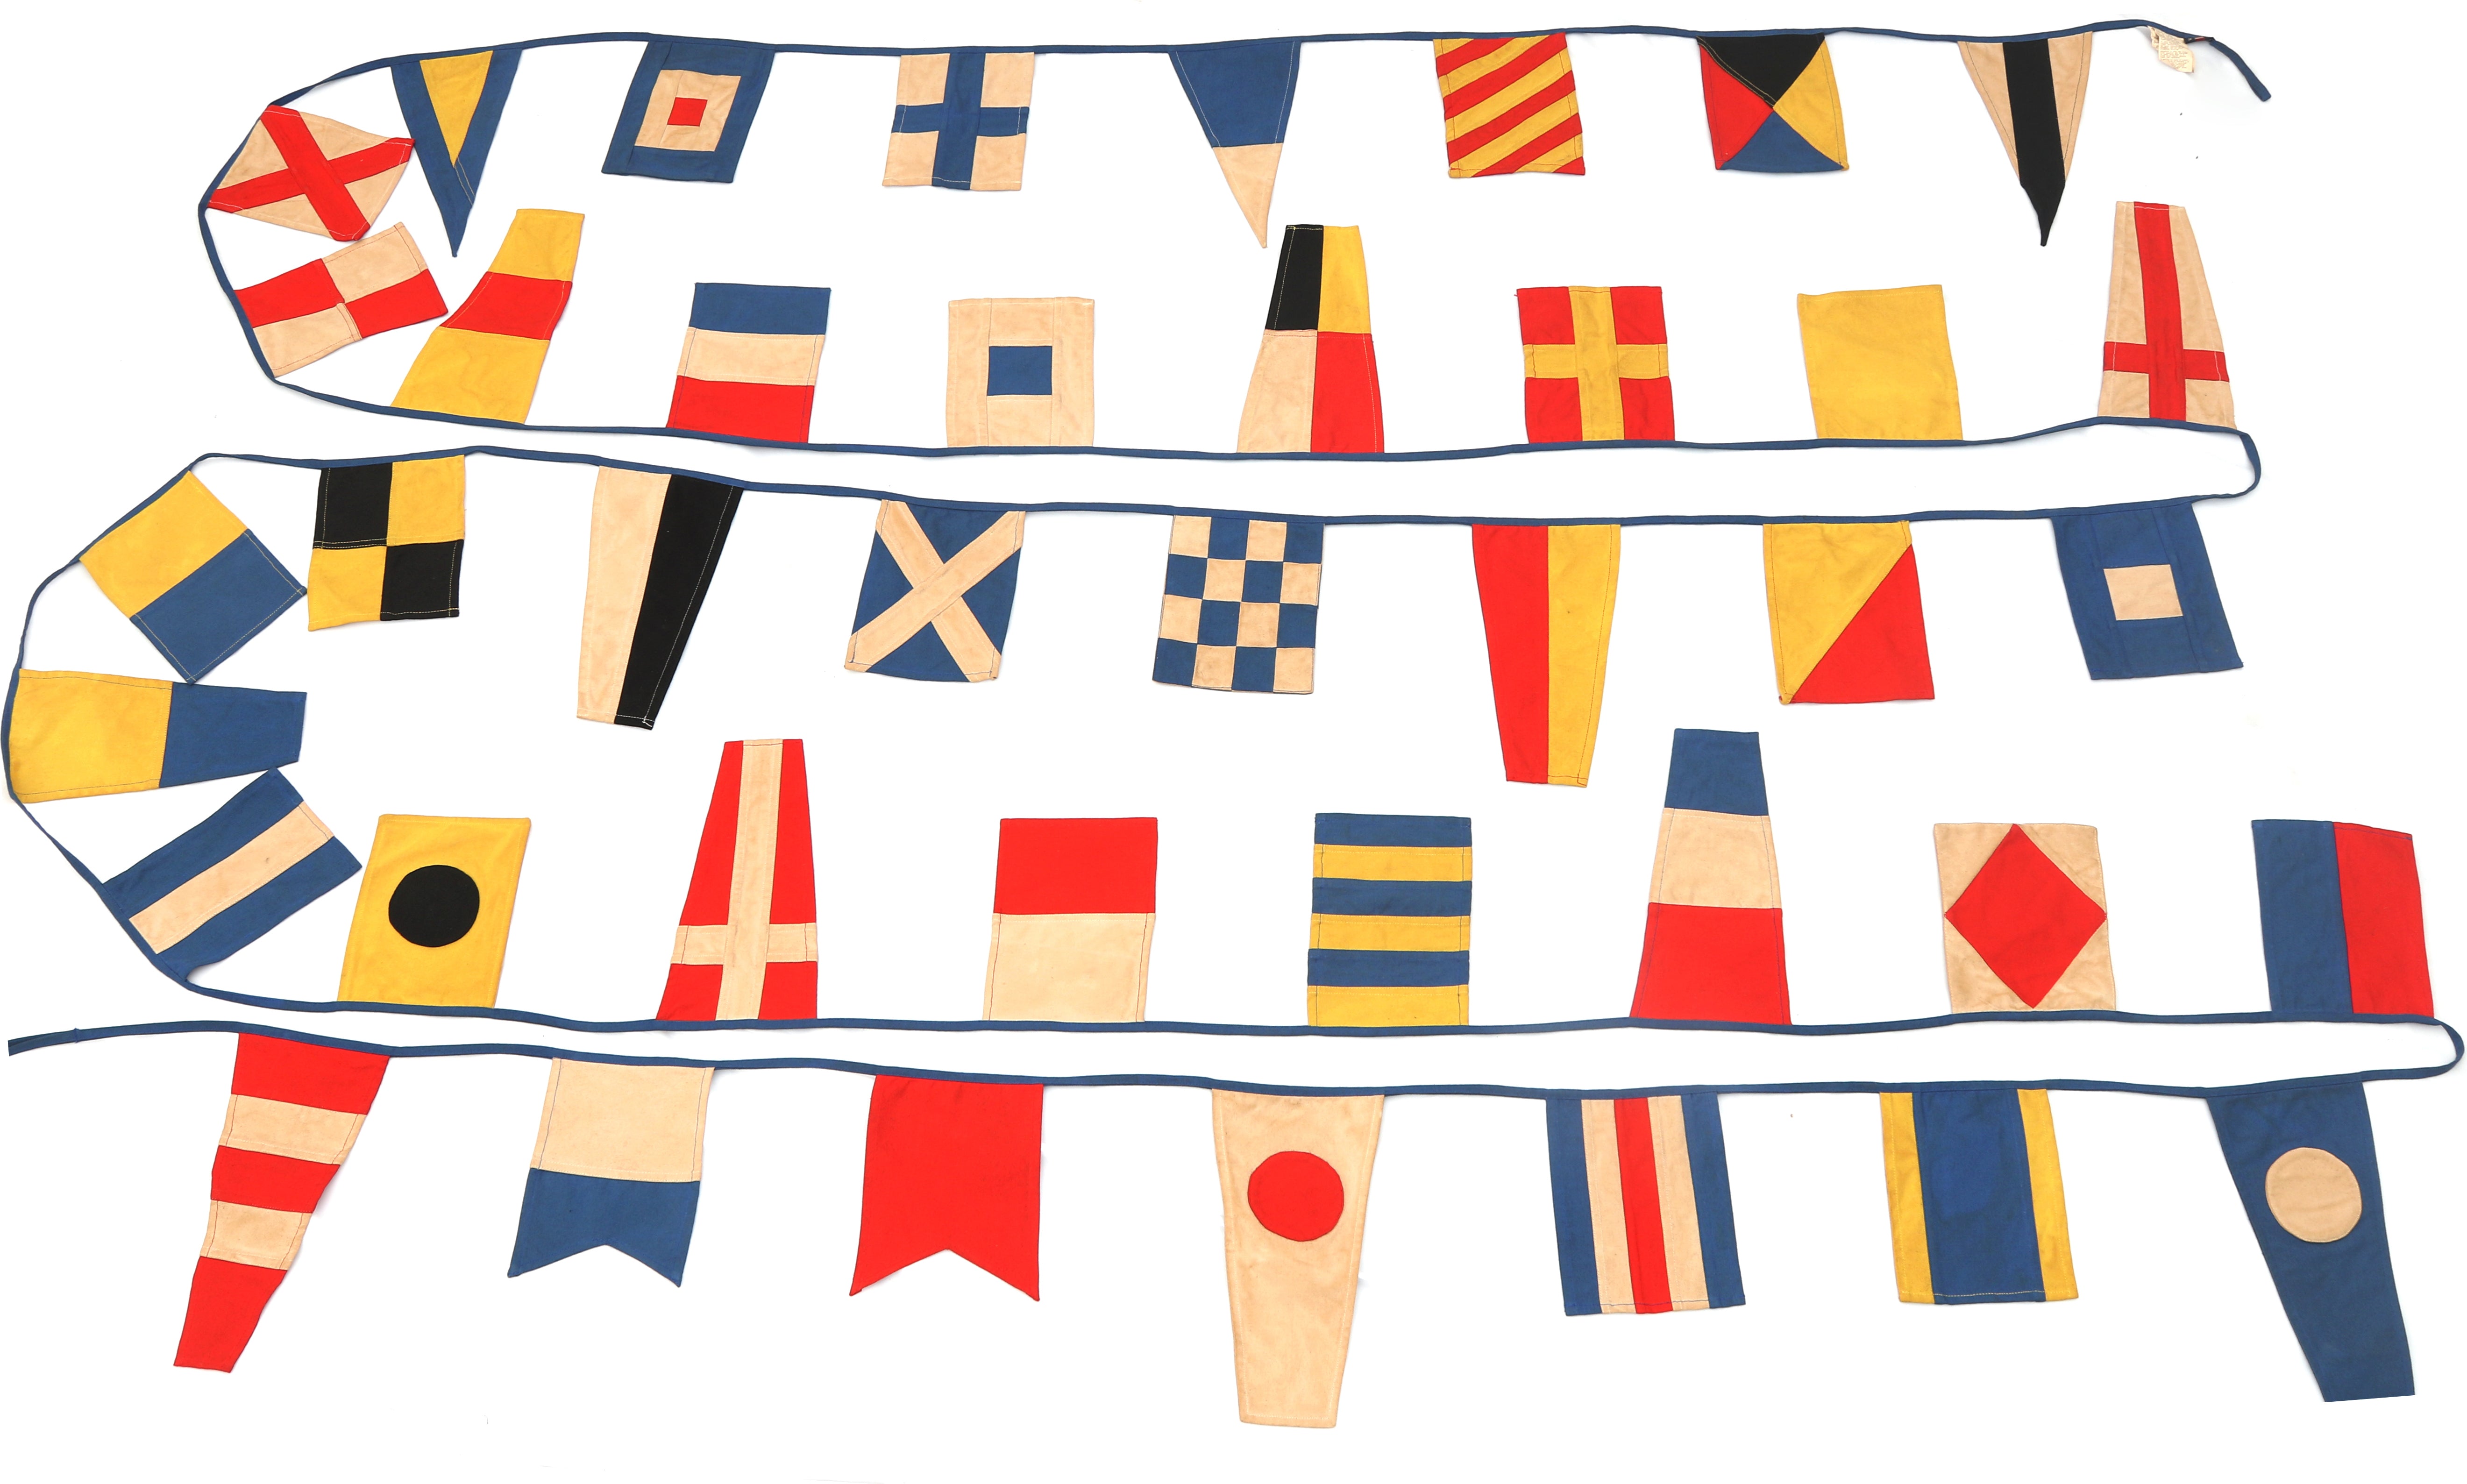 Stunning Cotton Canvas Extra Long Quality Nautical Tea Stained Bunting Alphabet Numbers Signal Sailing Boat